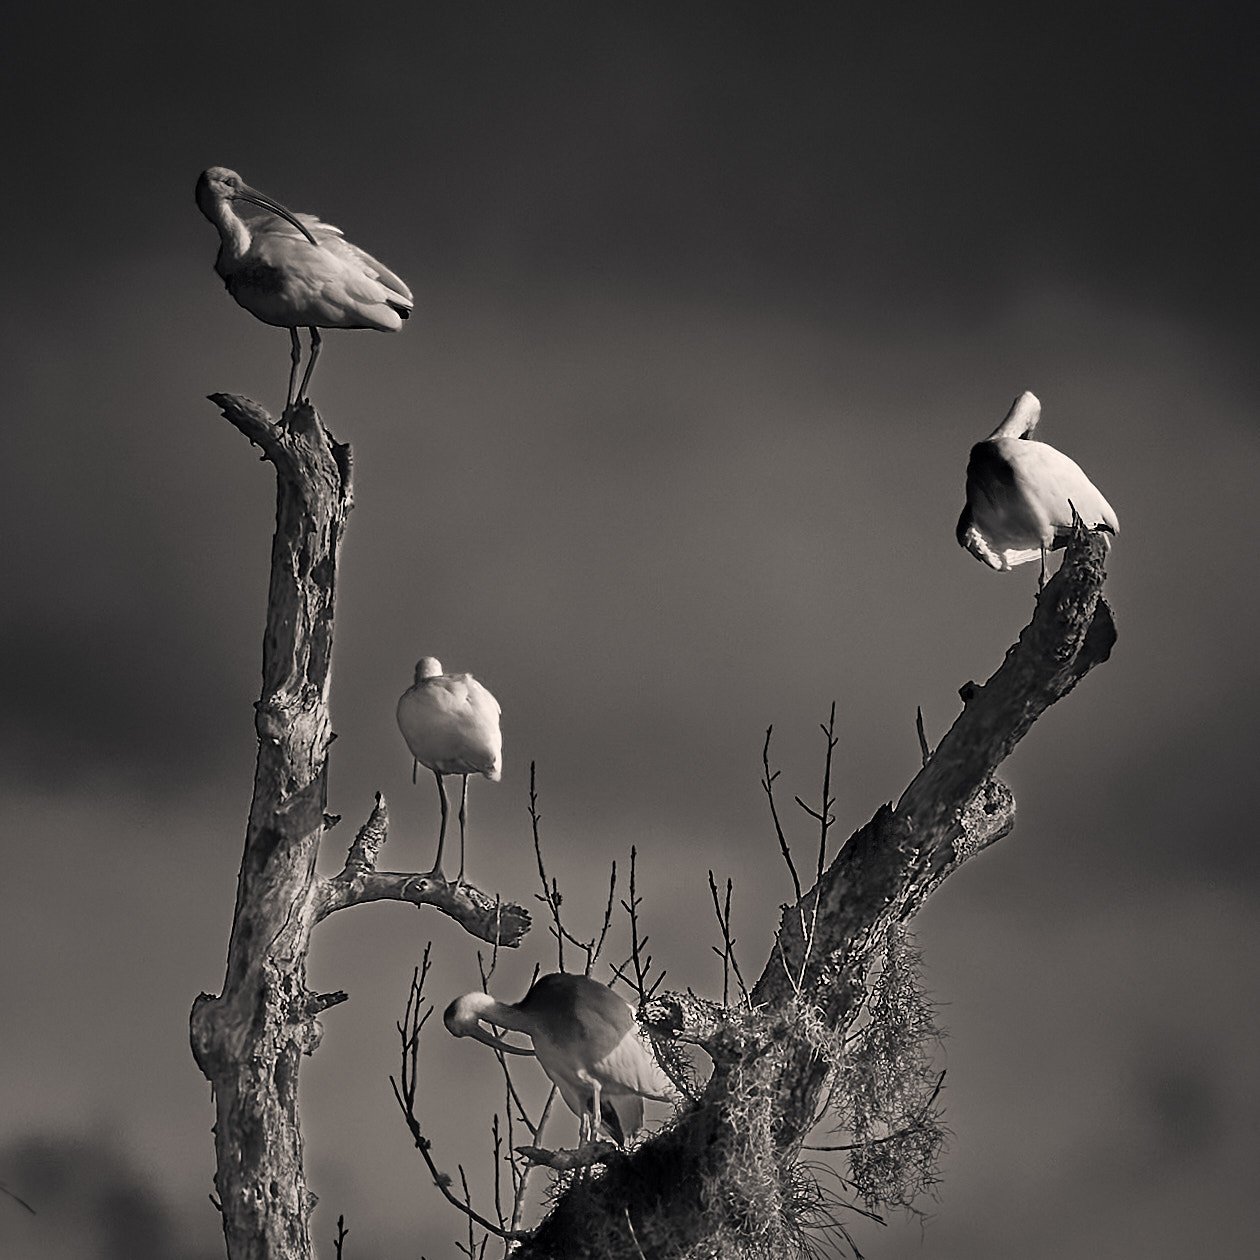 An Ibis family in a Tree by Greg Frucci